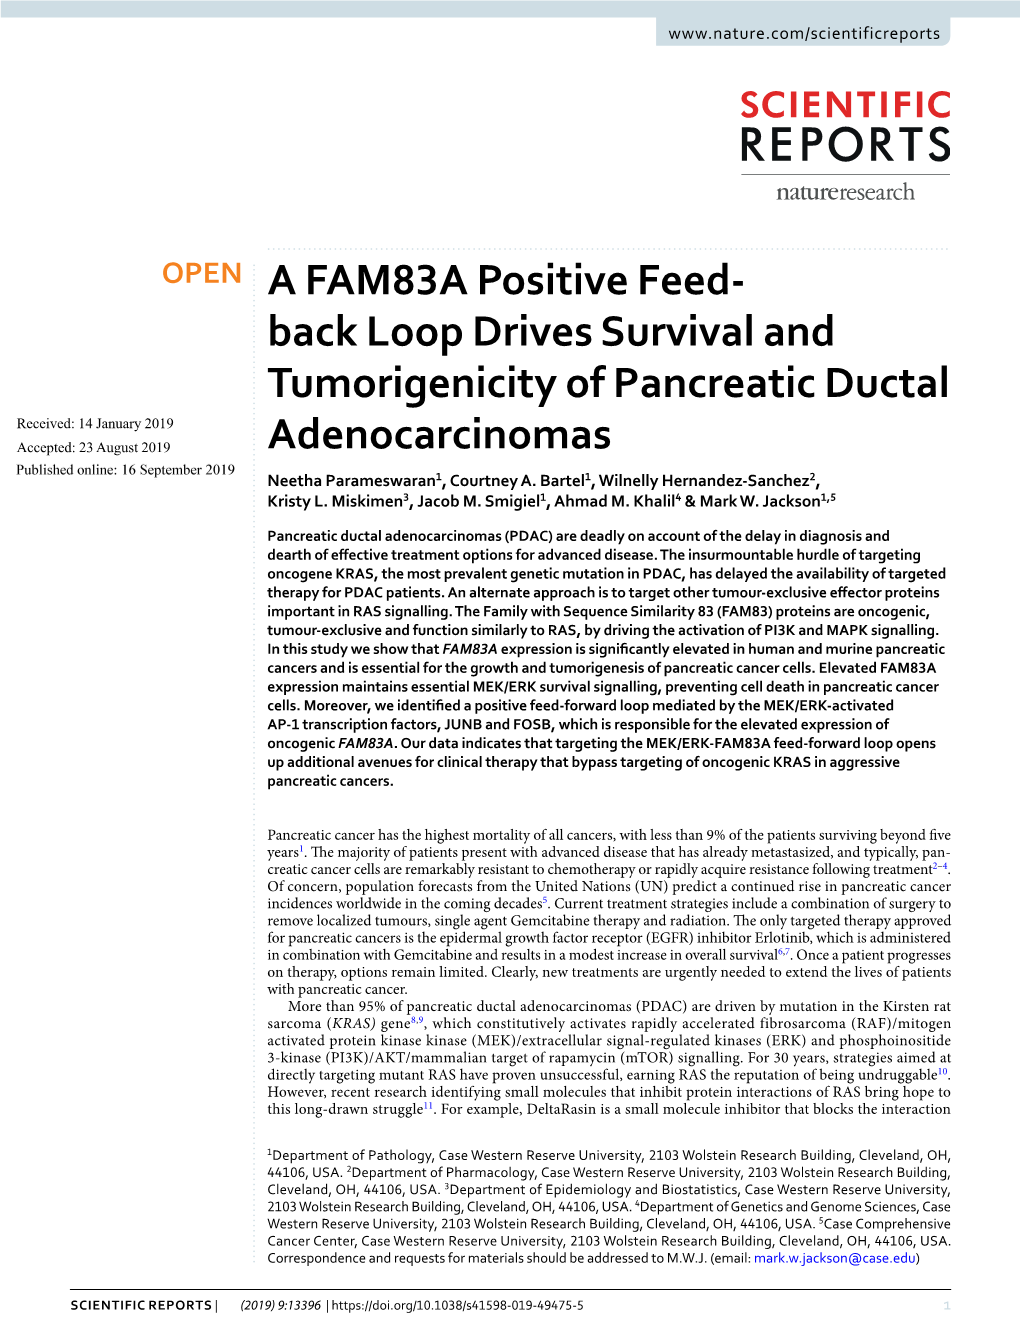 A FAM83A Positive Feed-Back Loop Drives Survival and Tumorigenicity of Pancreatic Ductal Adenocarcinomas